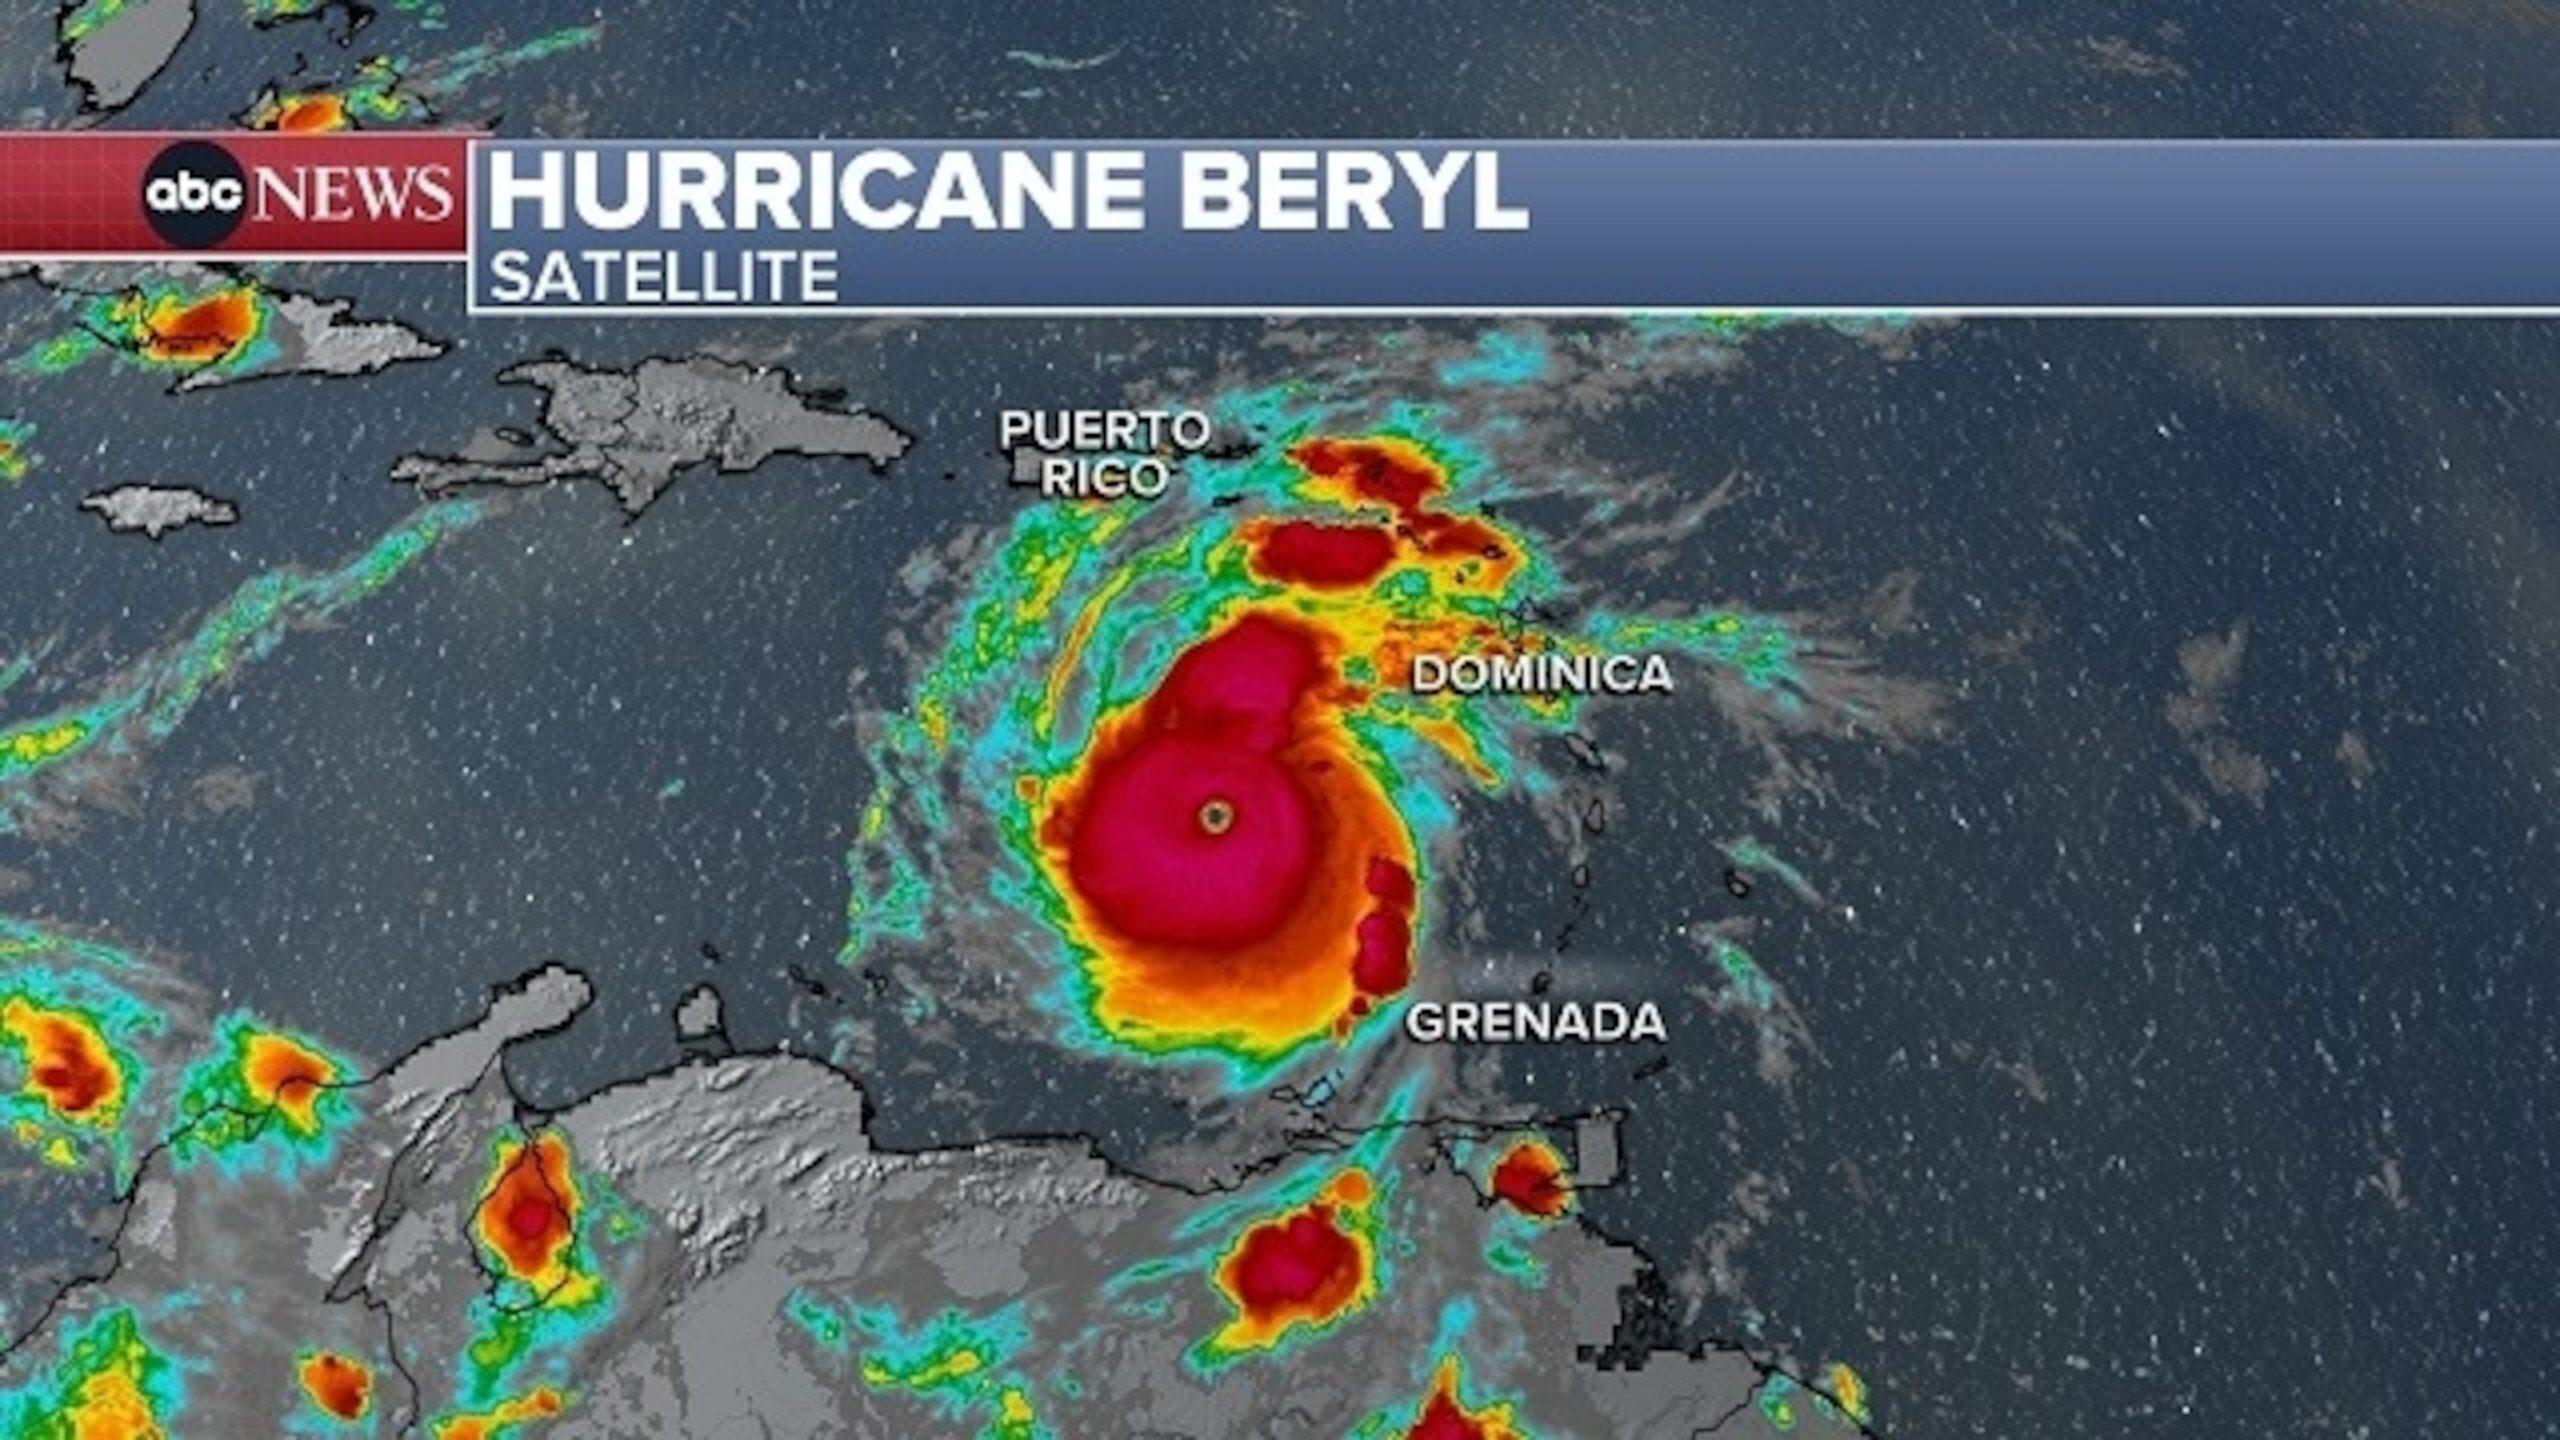 Hurricane Warning Issued for Jamaica as Beryl Strengthens to Category 5